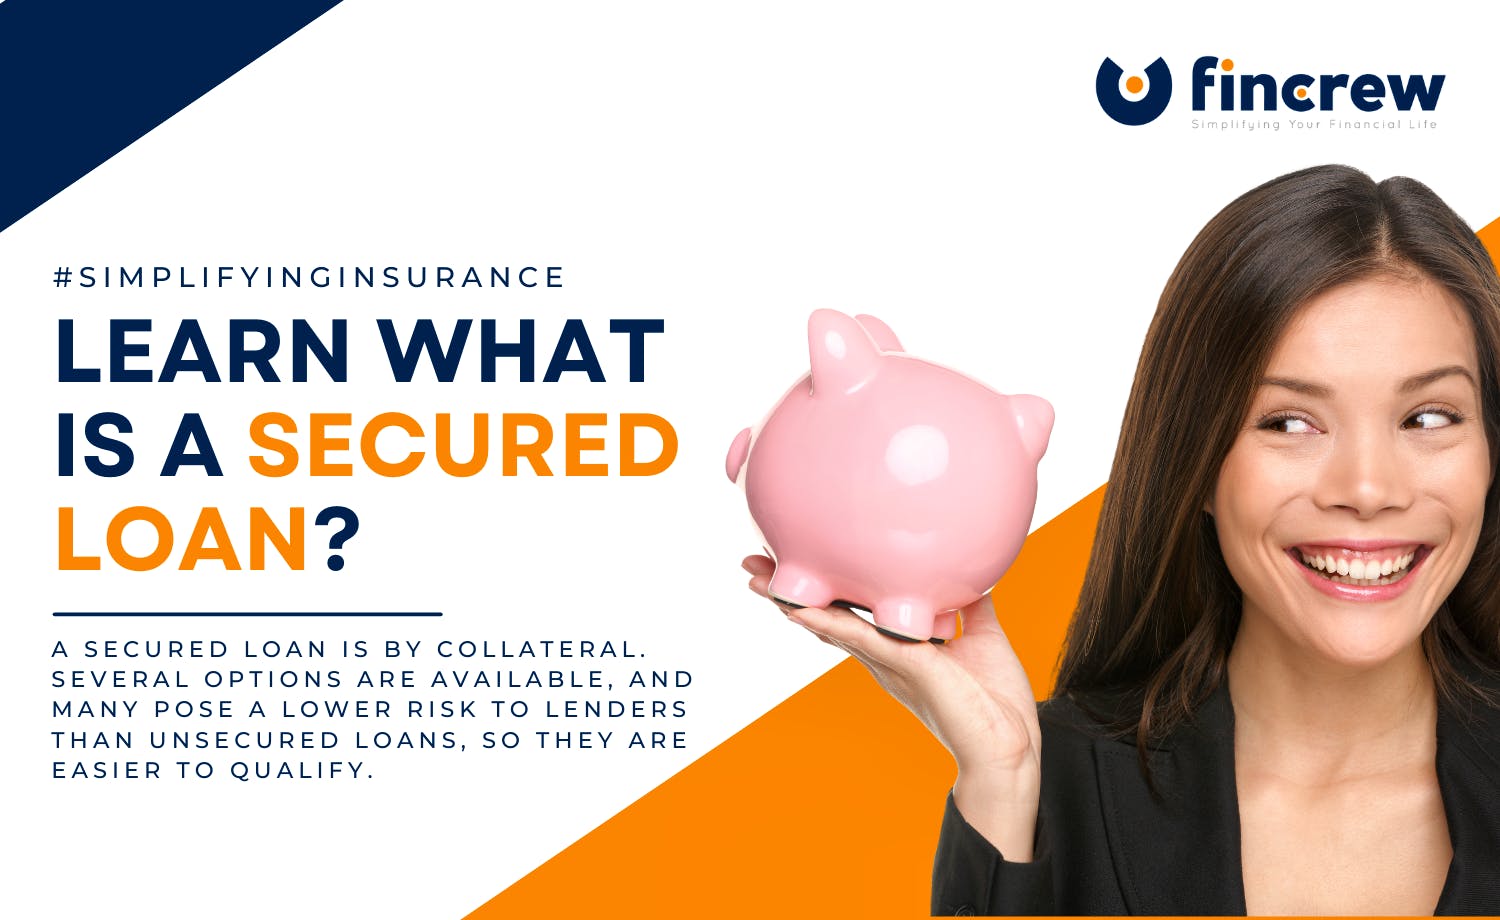 What Is a Secured Loan?